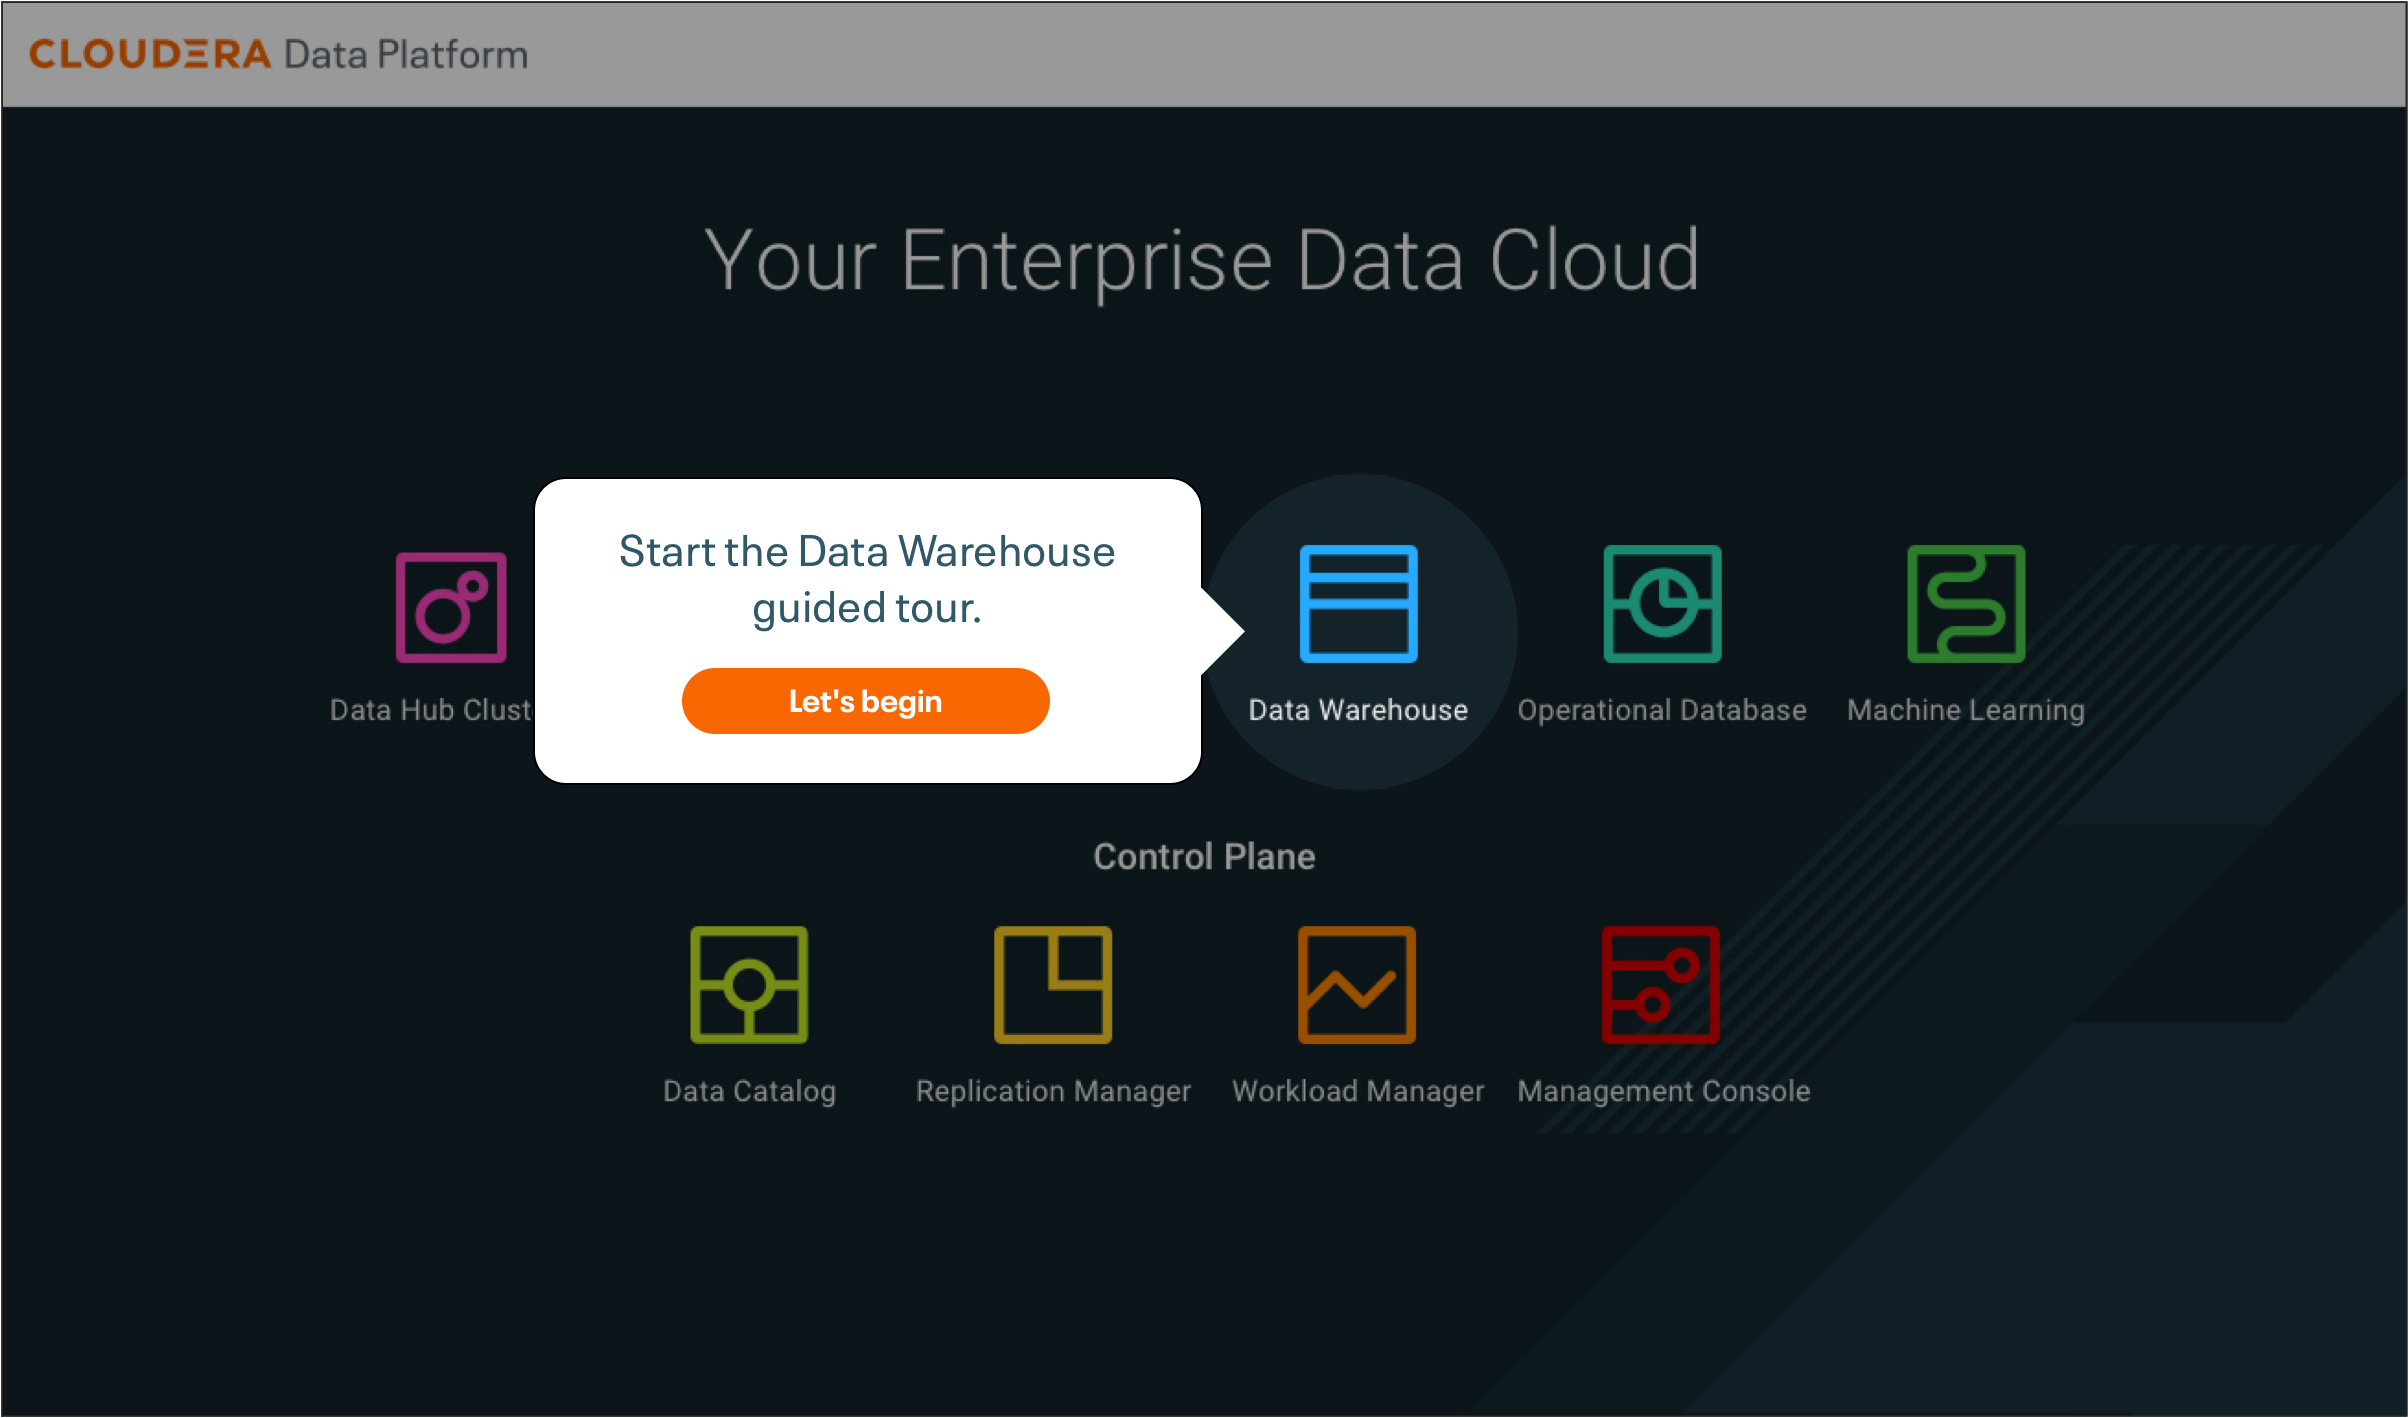 Start the Data Warehouse guided tour